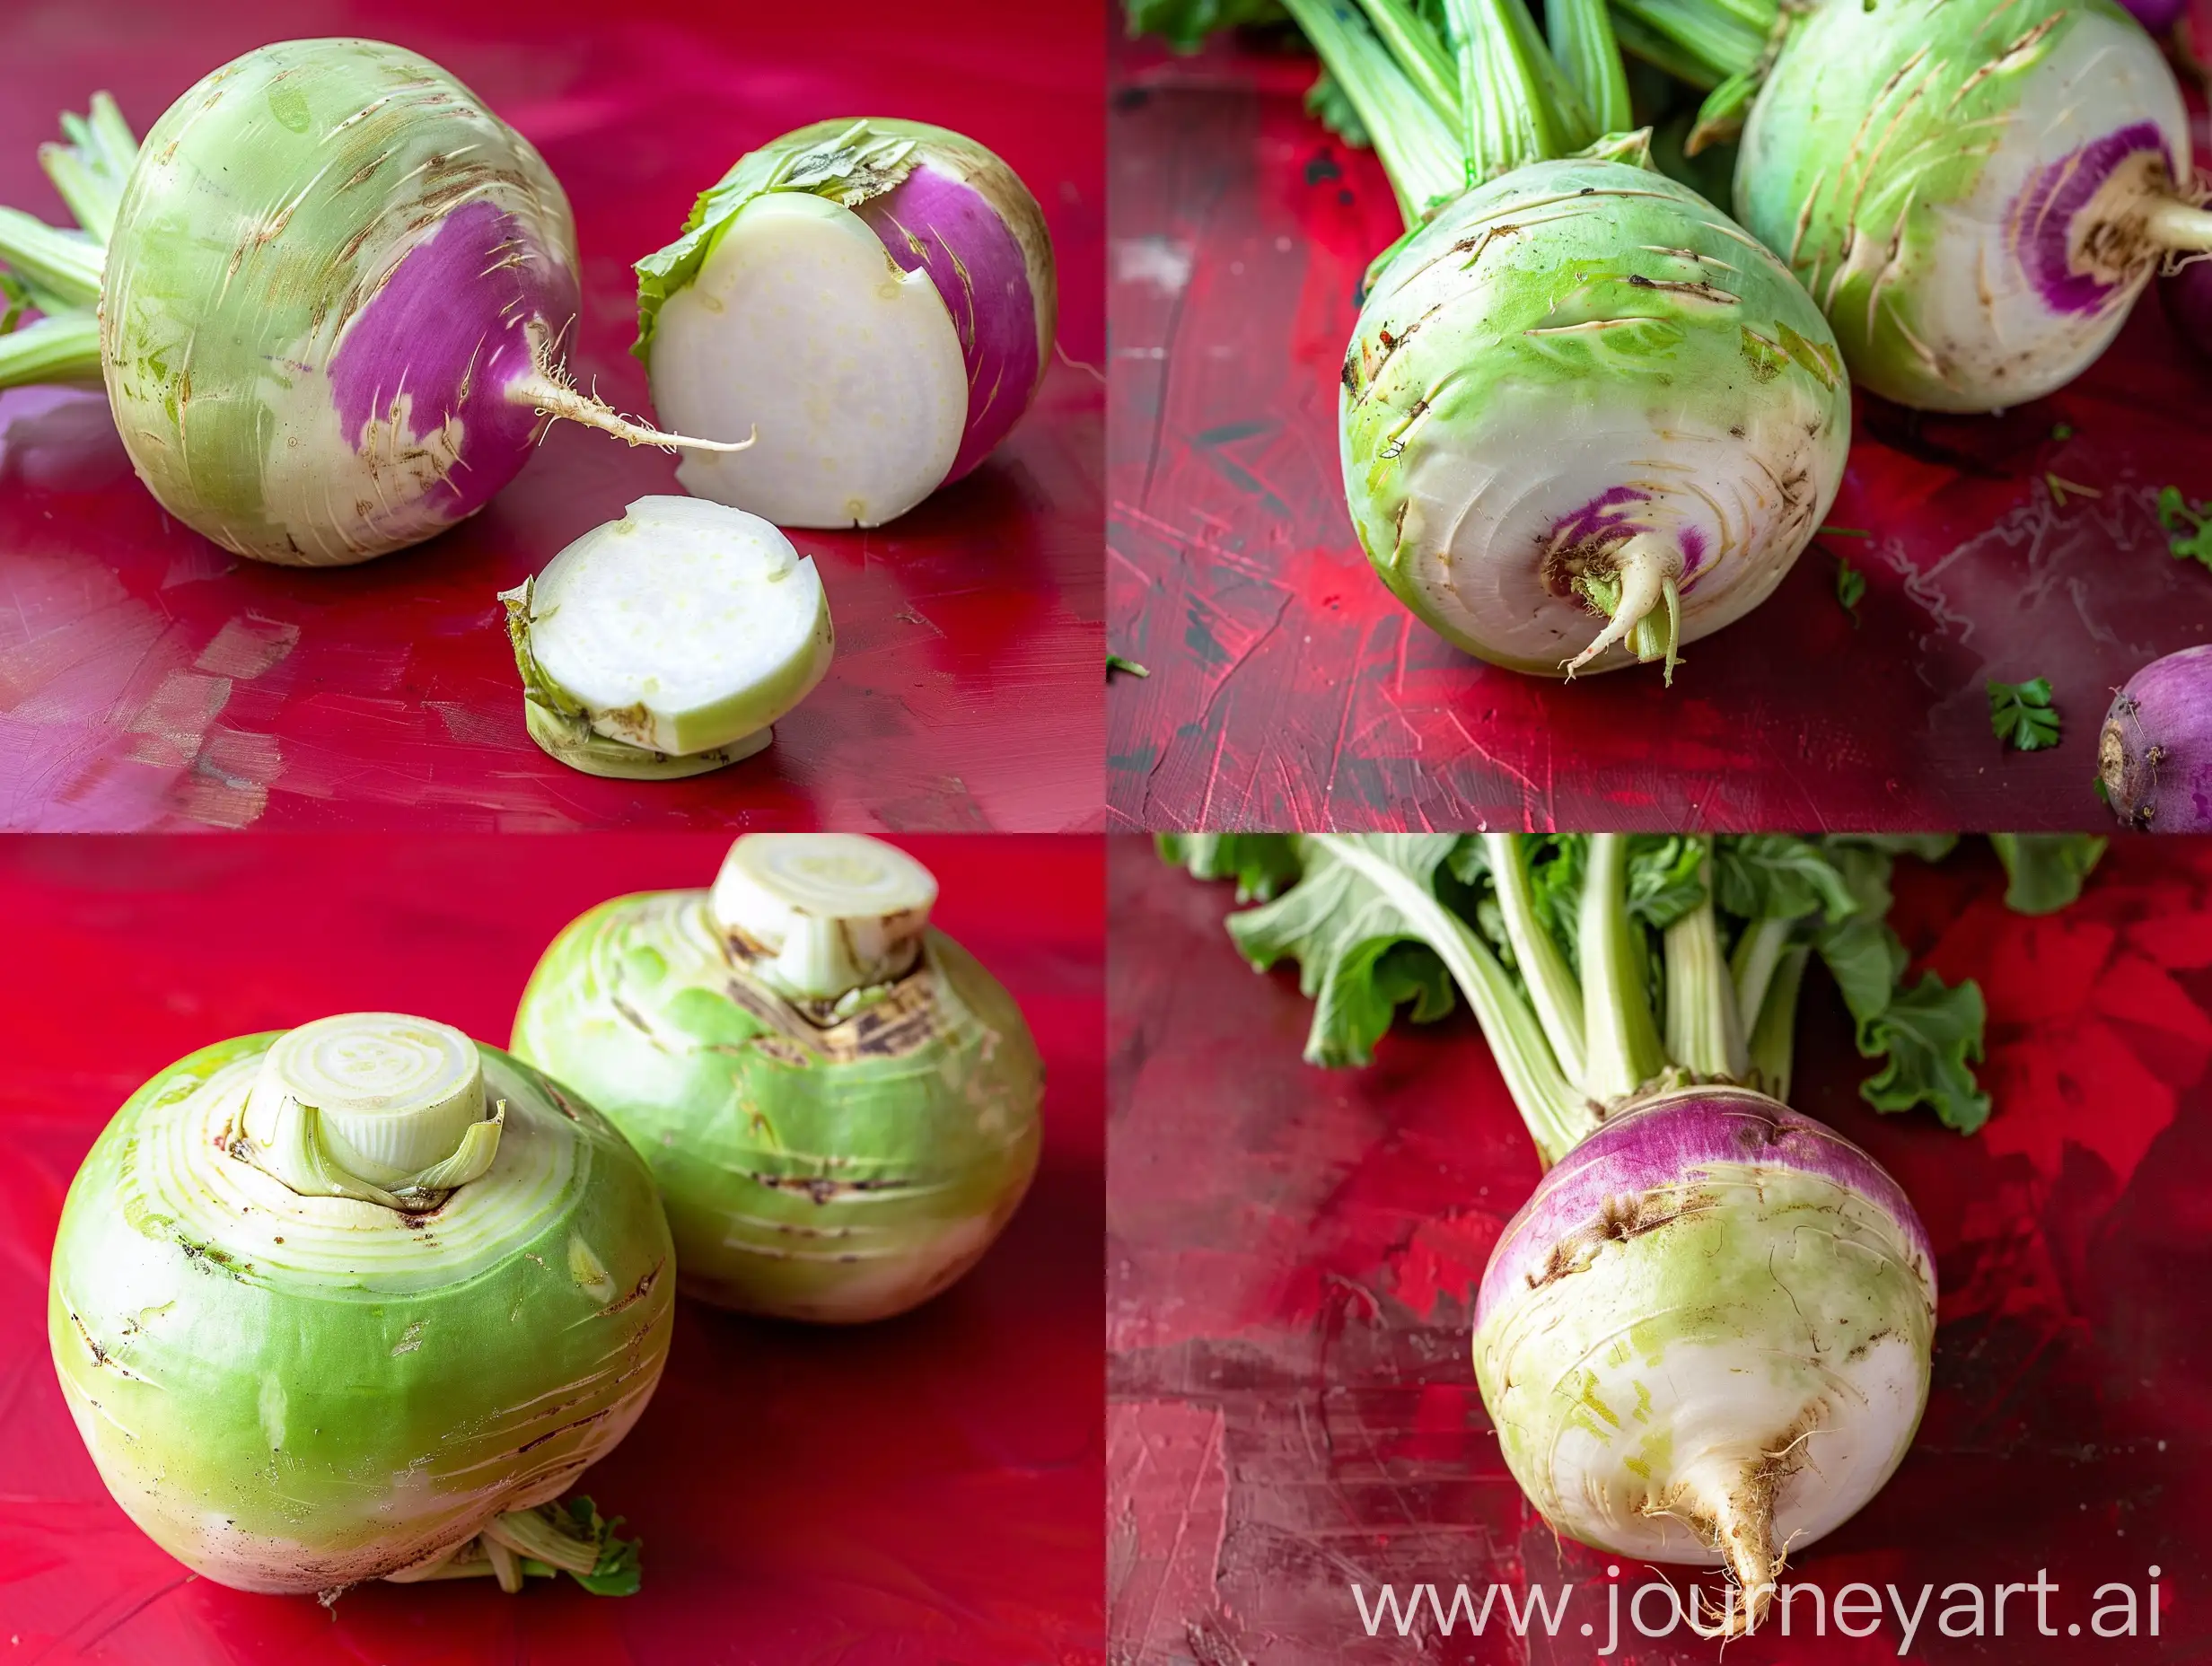 Vibrant-Turnip-on-Red-Background